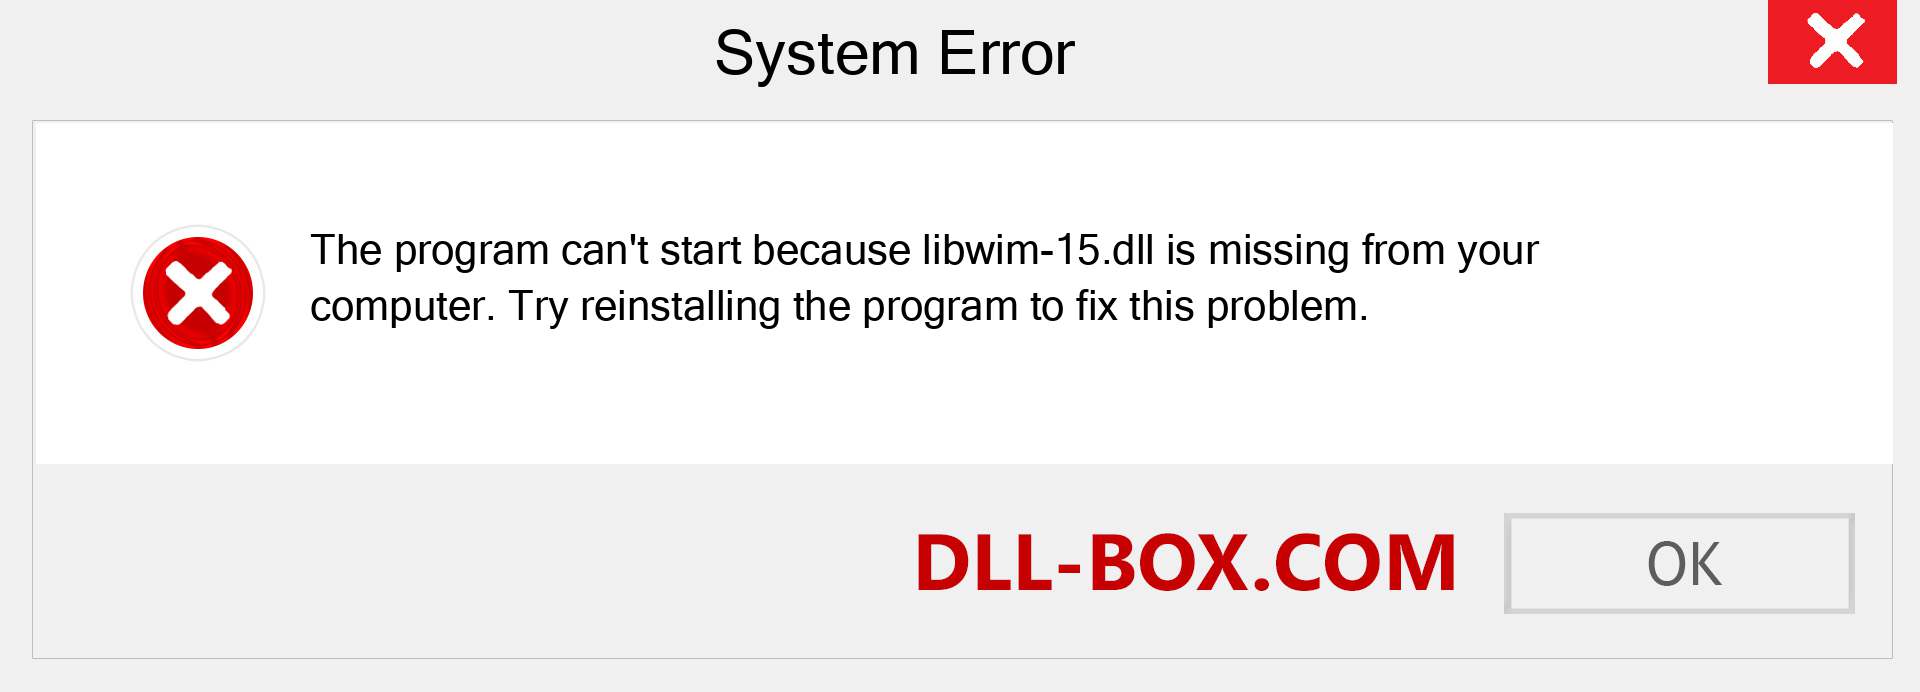  libwim-15.dll file is missing?. Download for Windows 7, 8, 10 - Fix  libwim-15 dll Missing Error on Windows, photos, images